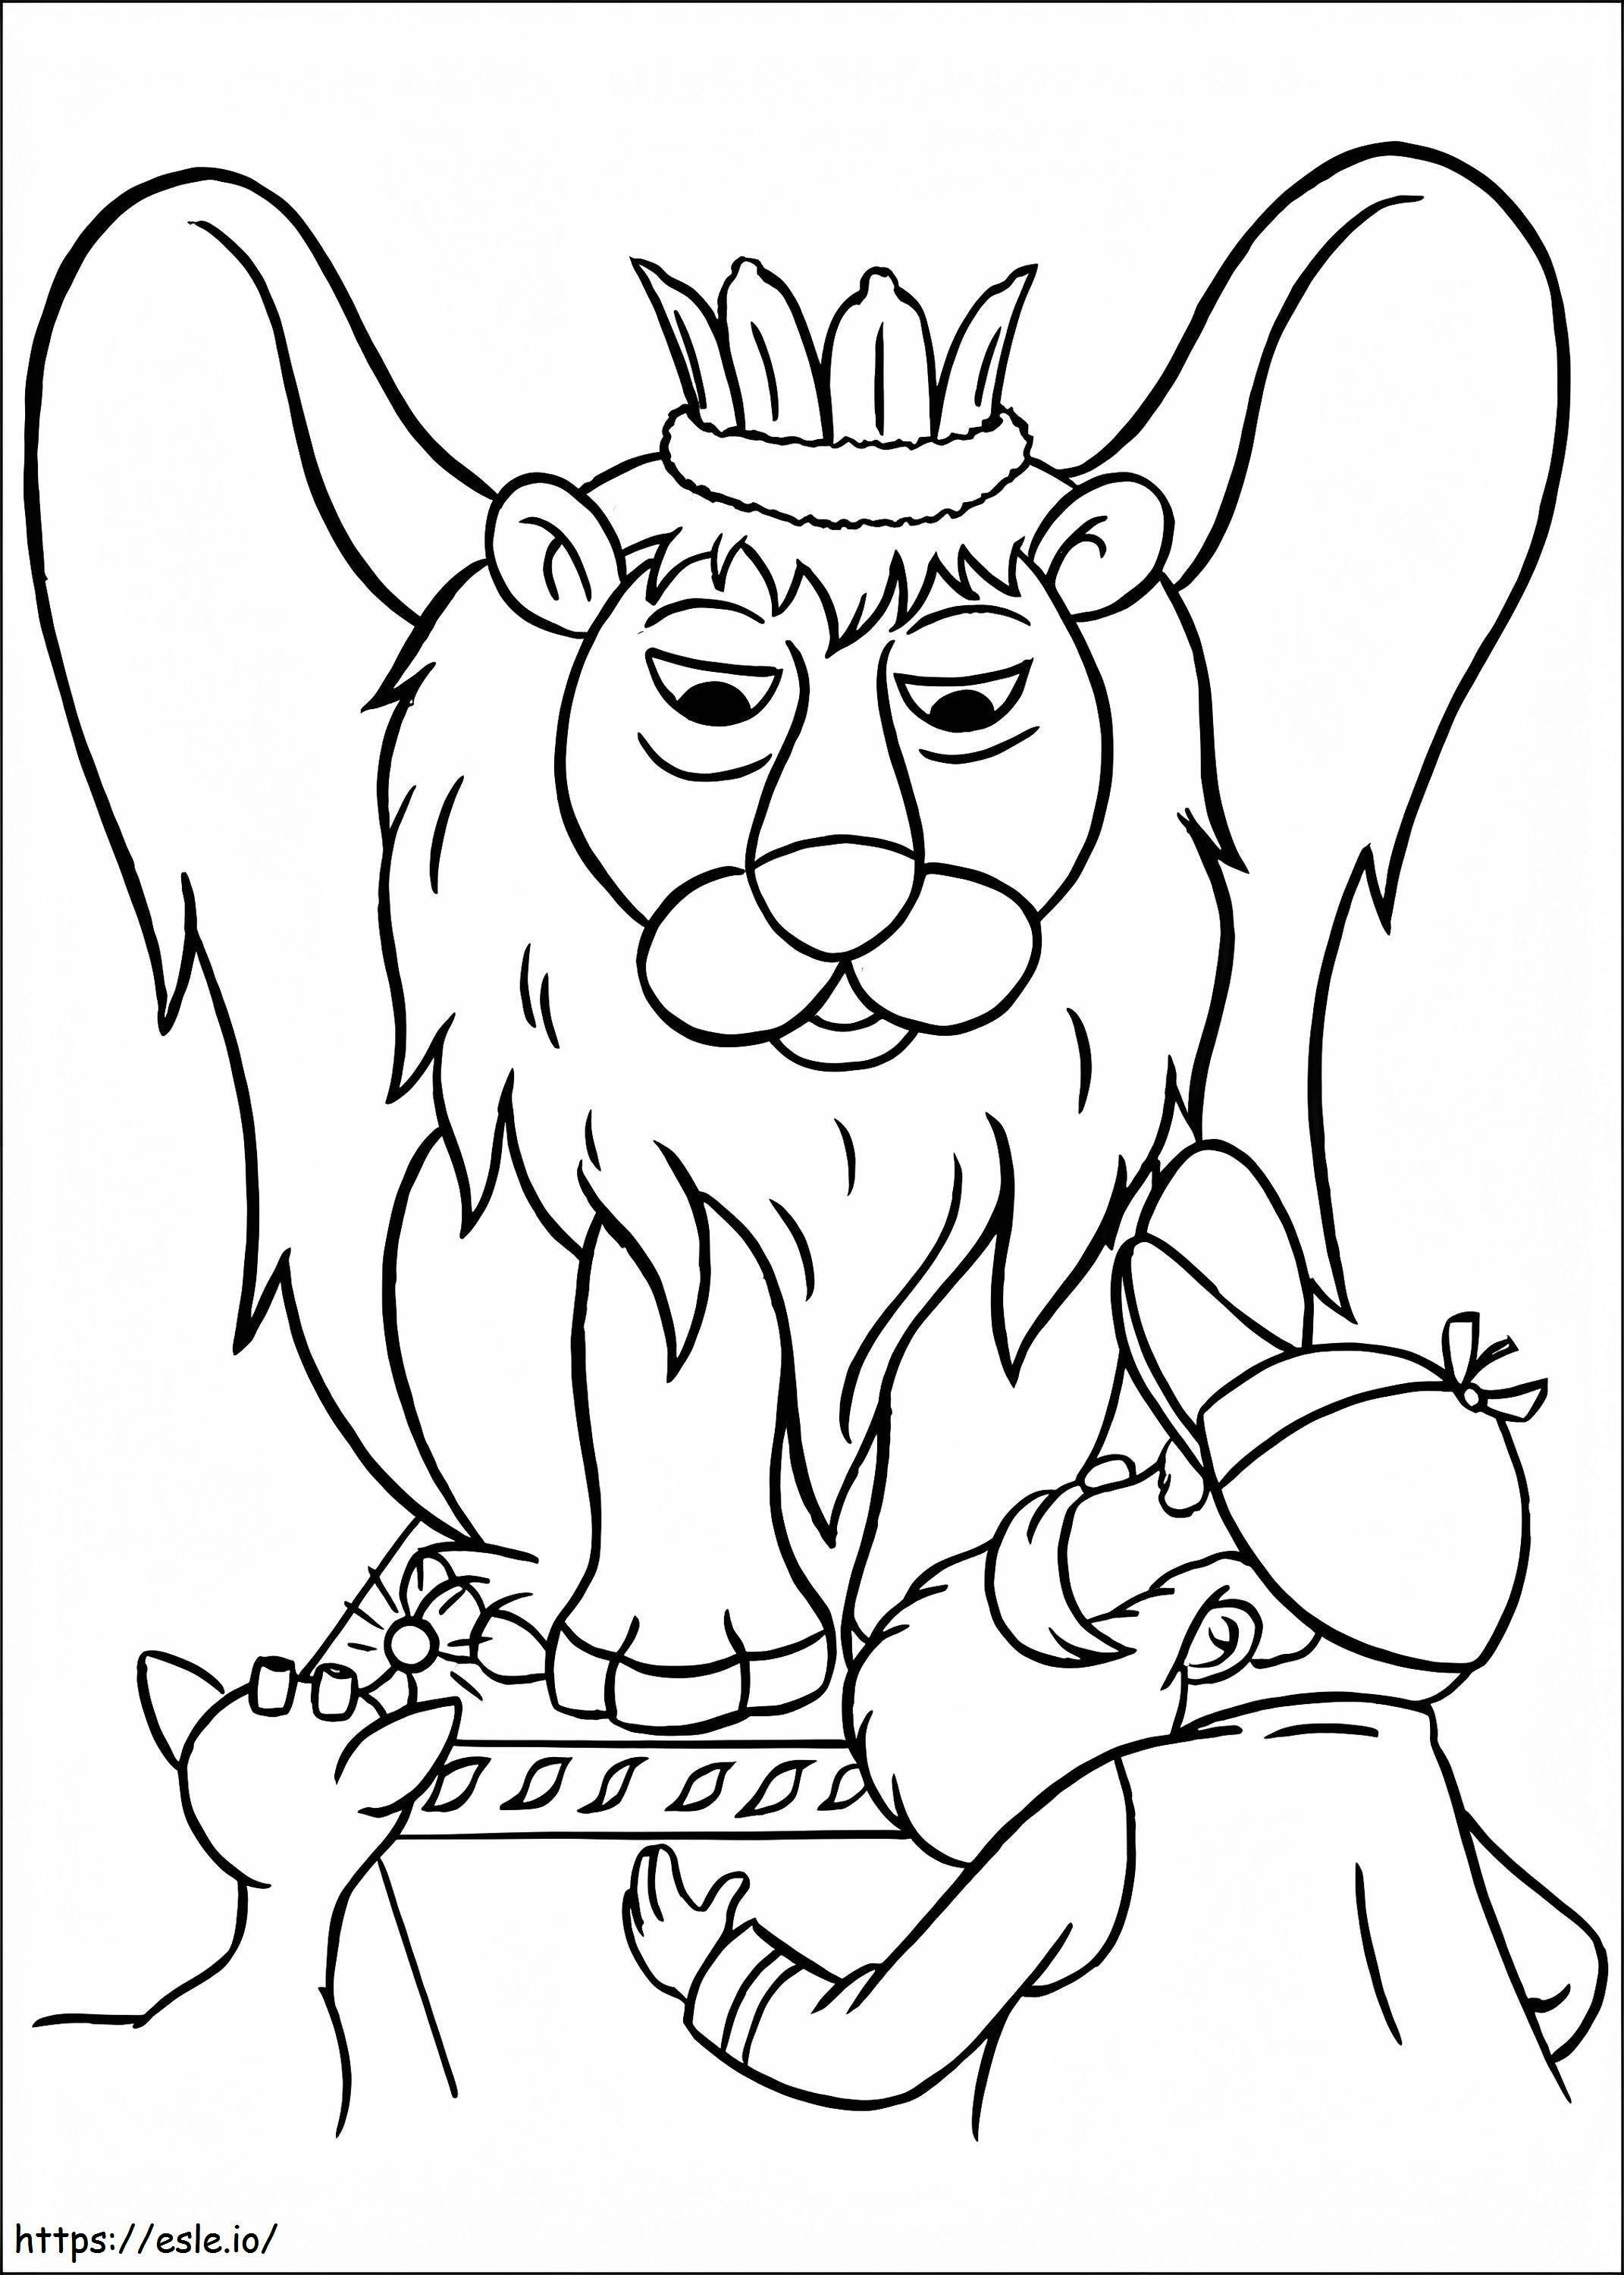 Rudolph And King Moonracer coloring page